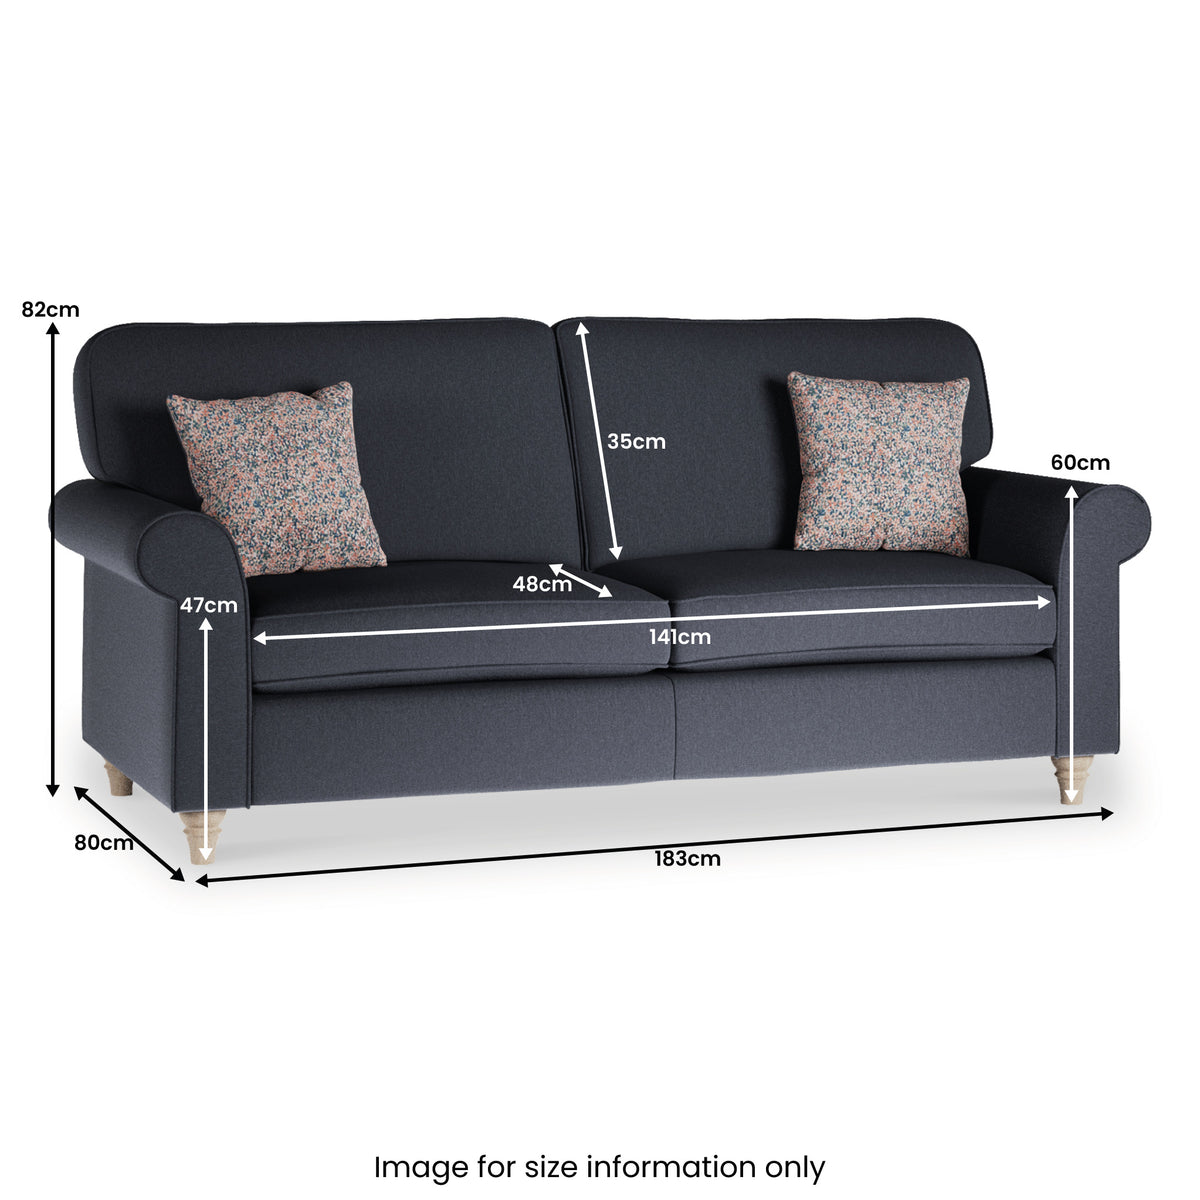 Thomas Navy 3 Seater Sofa Size Guide by Roseland Furniture